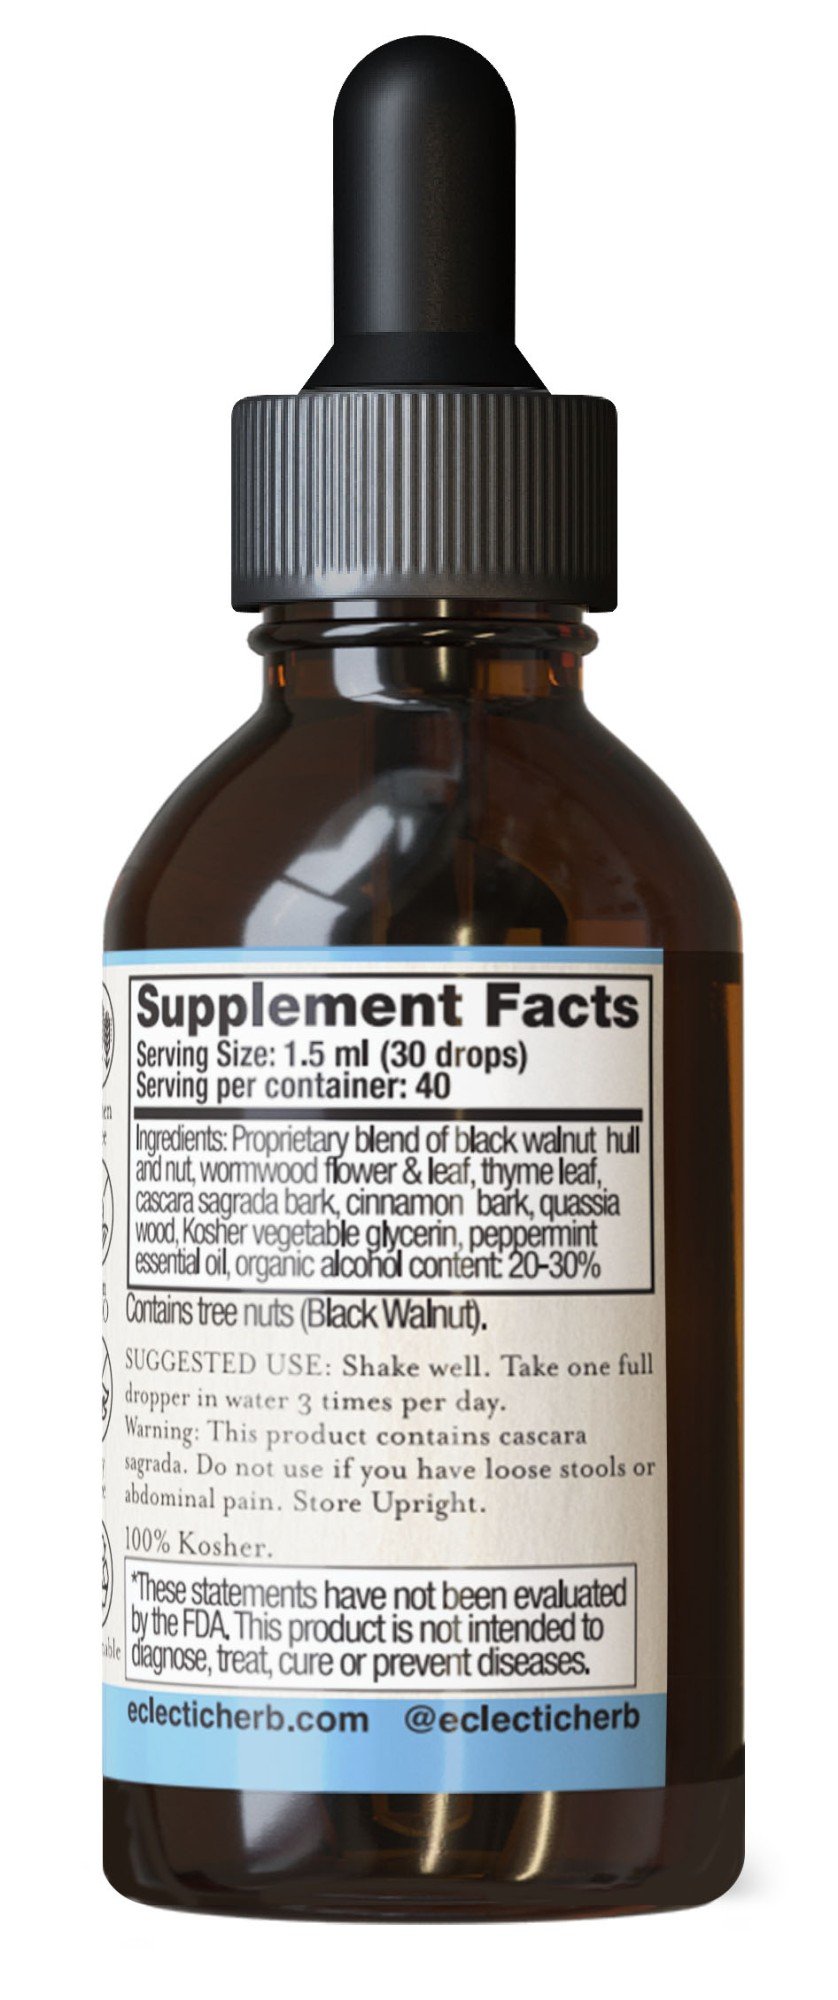 Eclectic Herb Para-Fight (formerly Black Walnut - Wormwood) Extract 2 oz Liquid